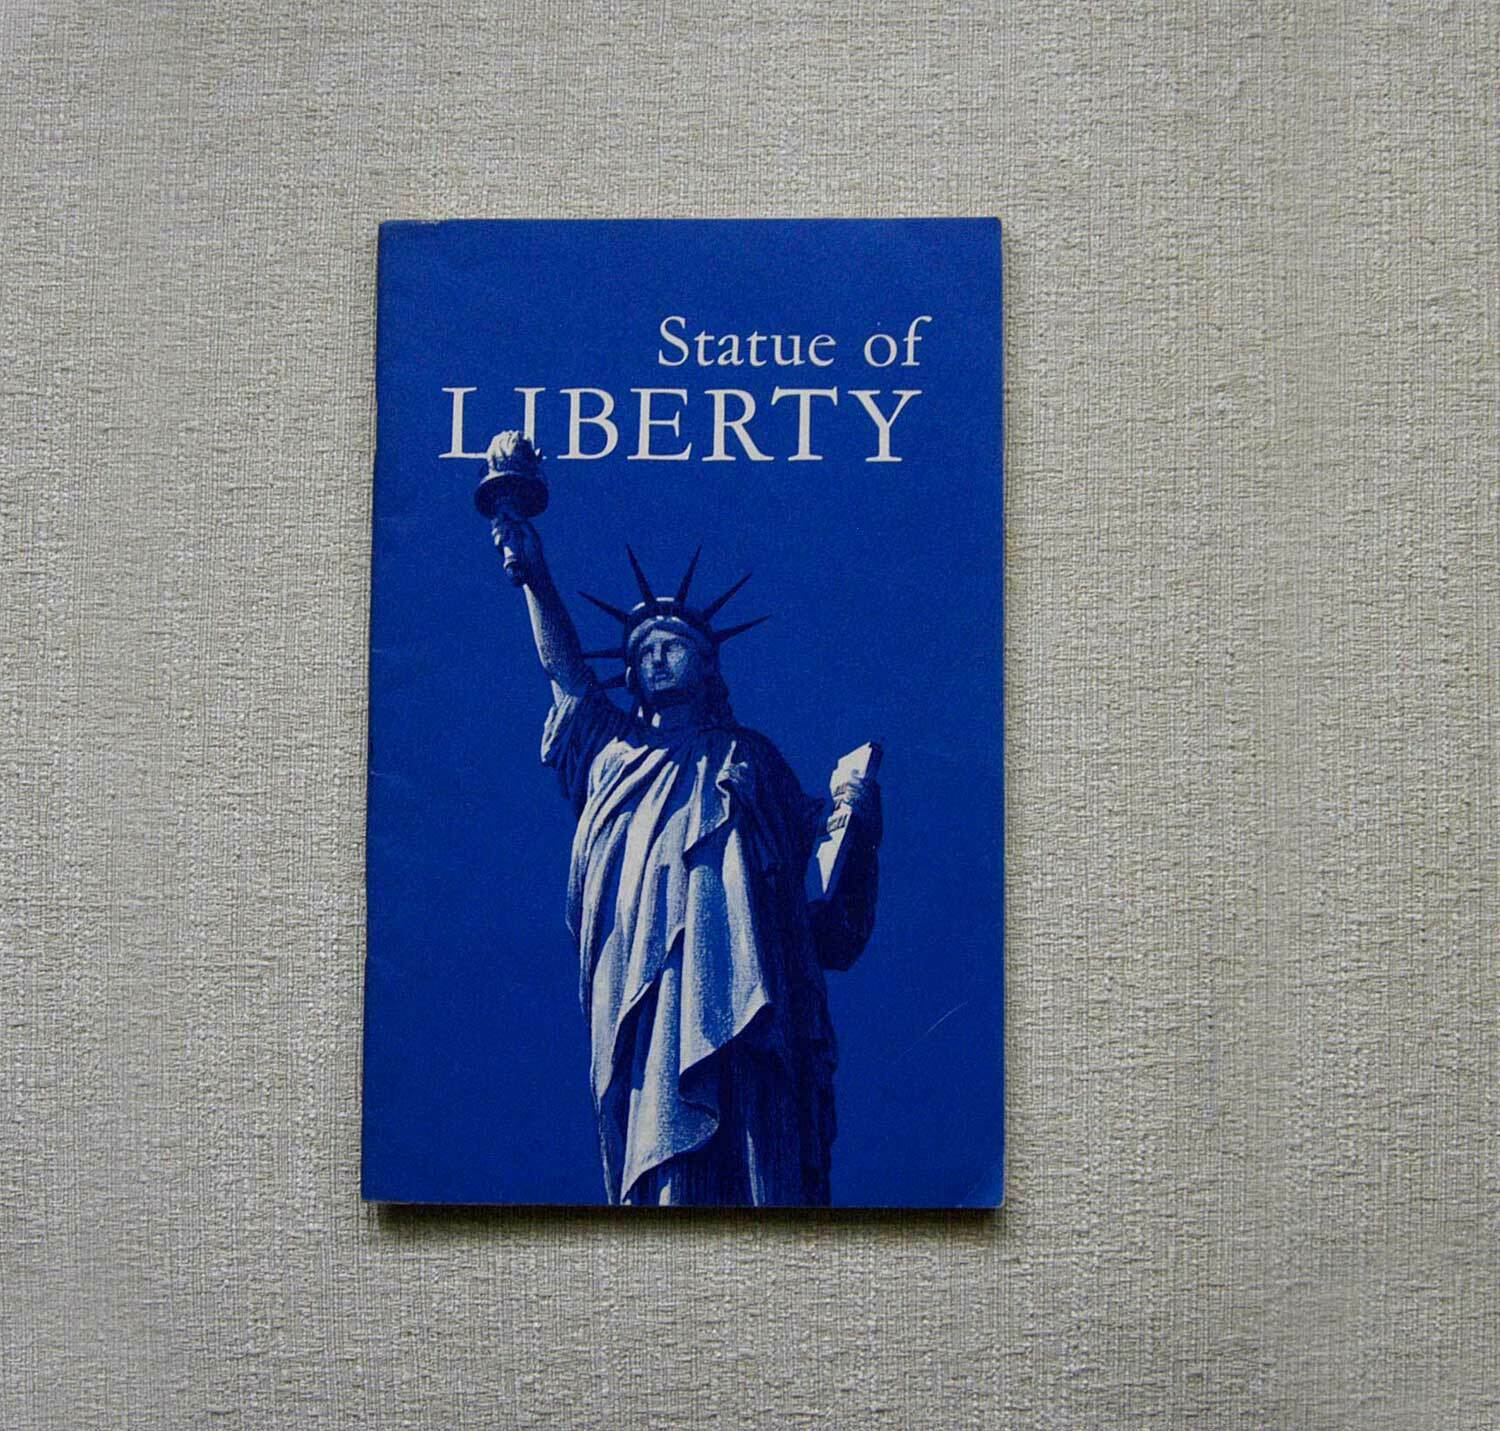 Statue of Liberty History Book US National Monument New York Vintage Publication